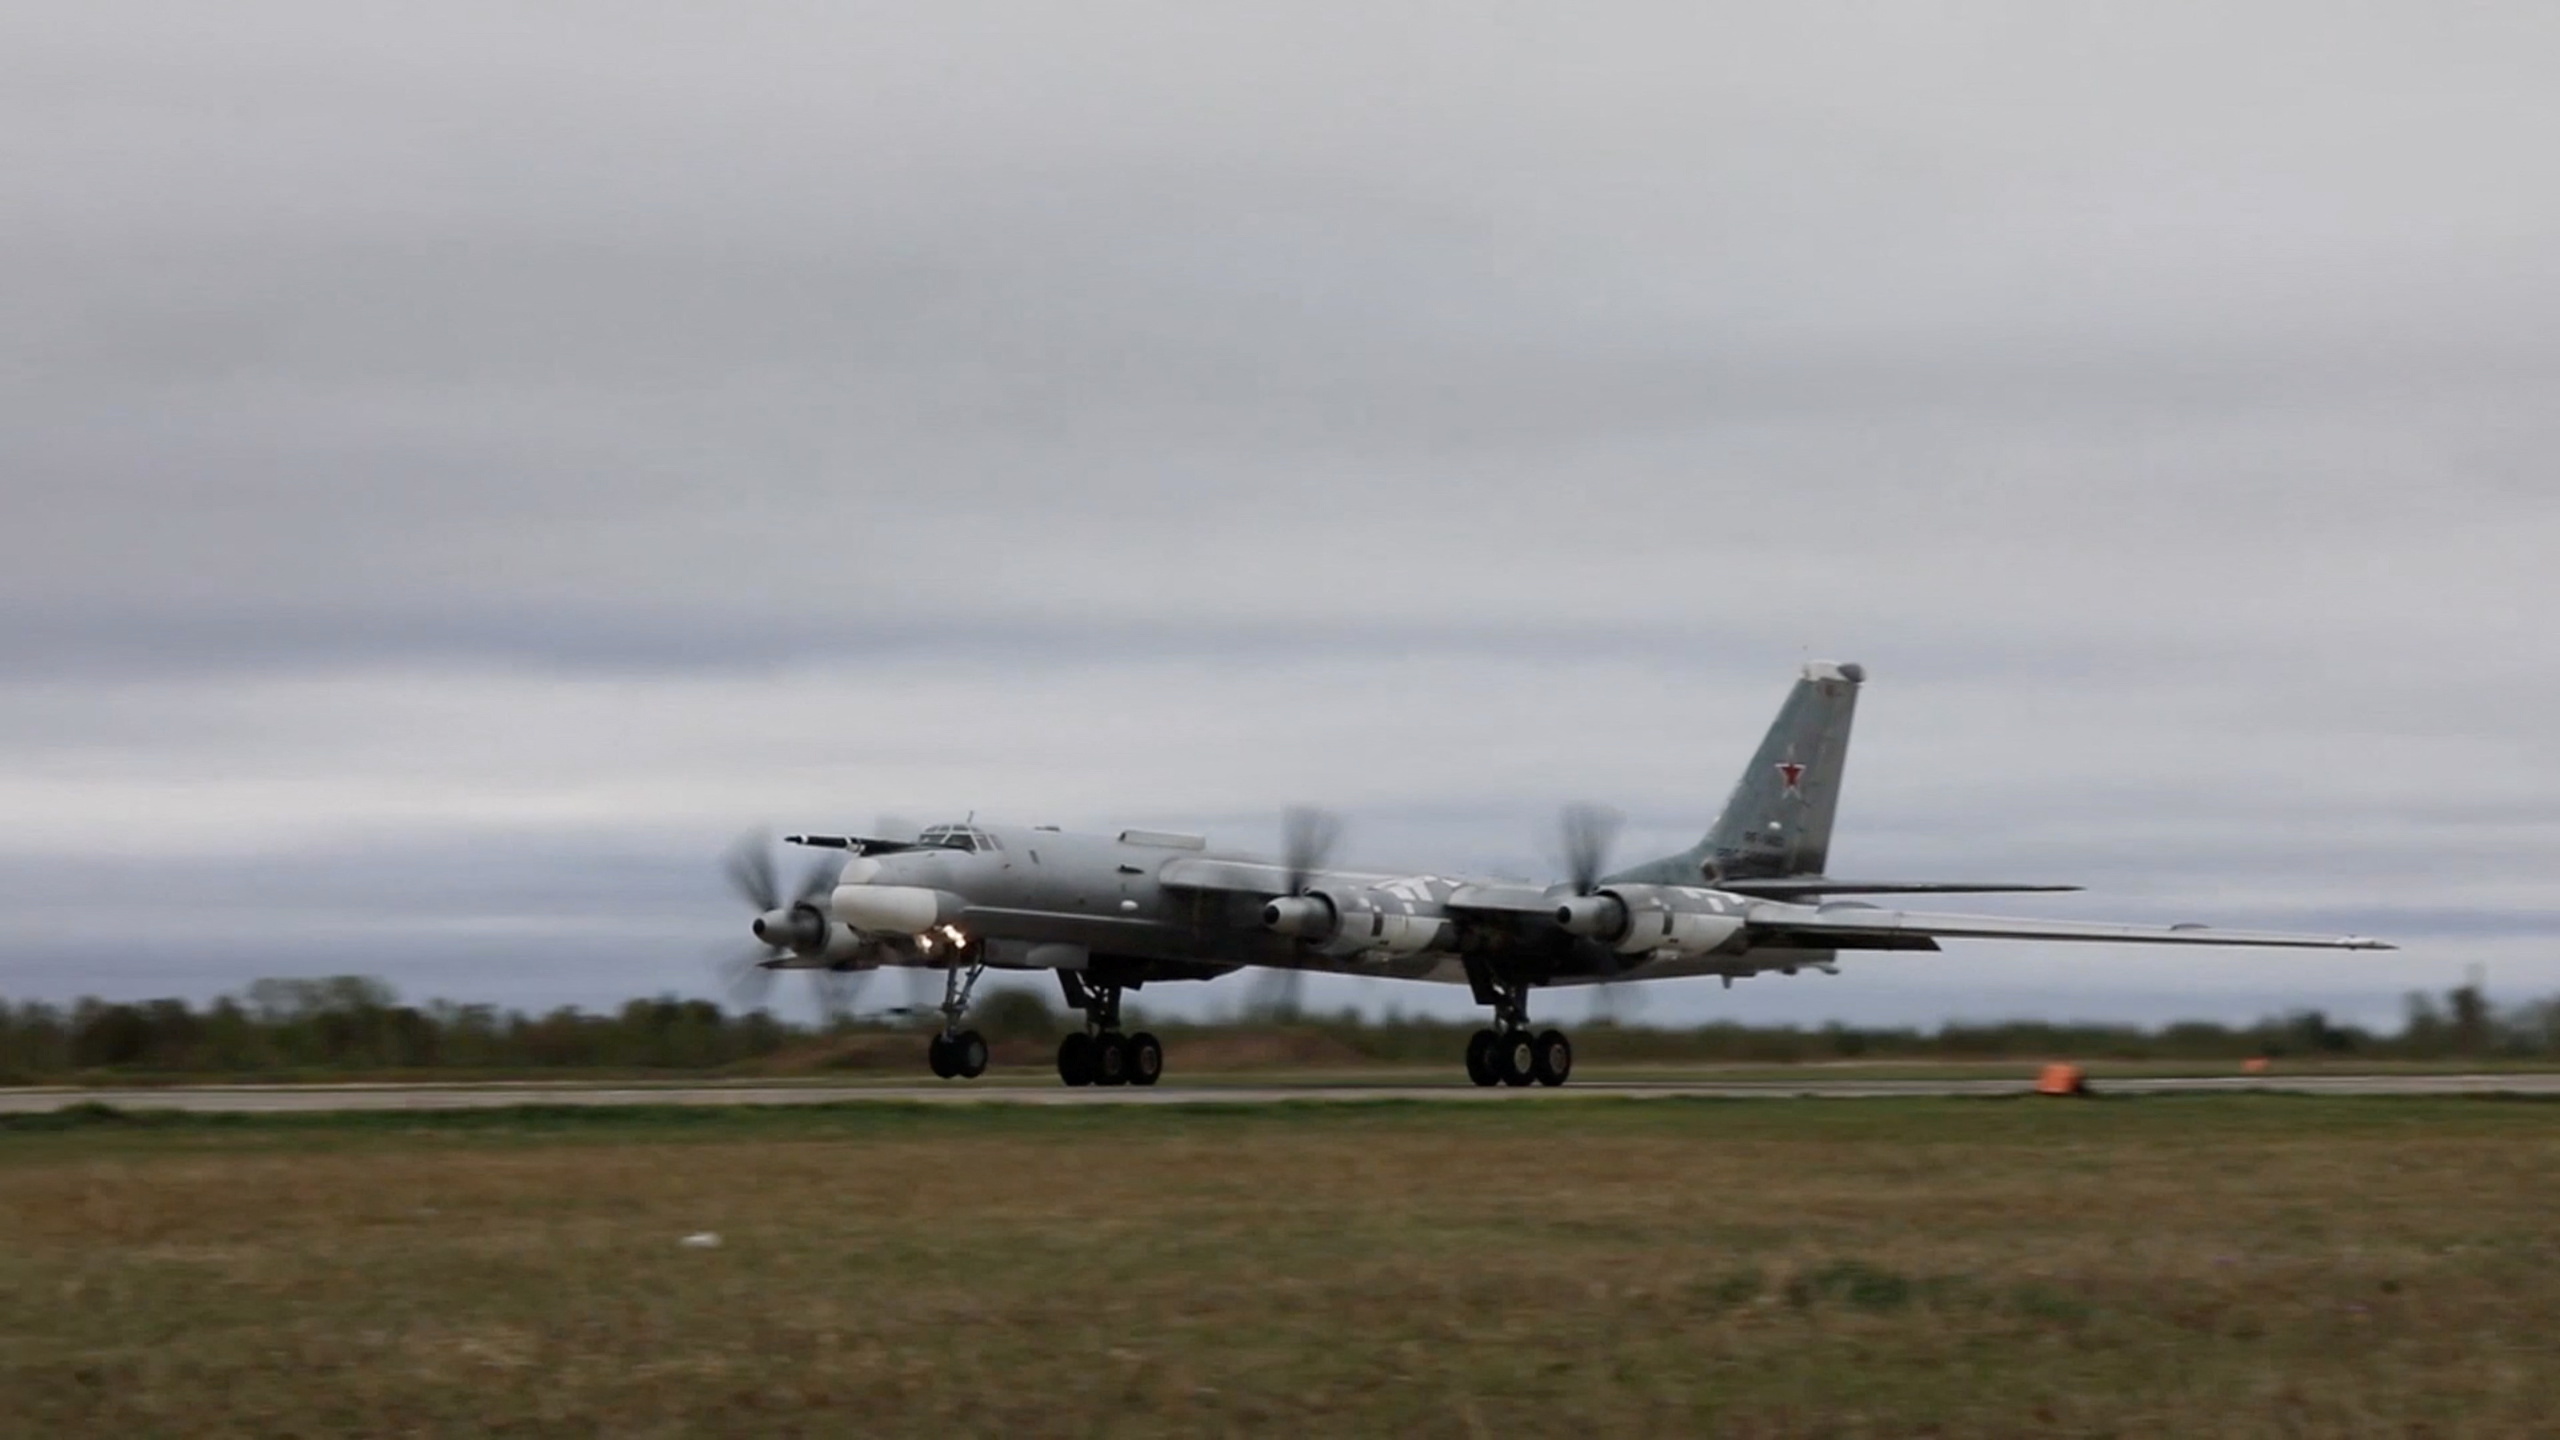 Russian Tu-95 strategic bomber flies during military exercises at an unidentified location